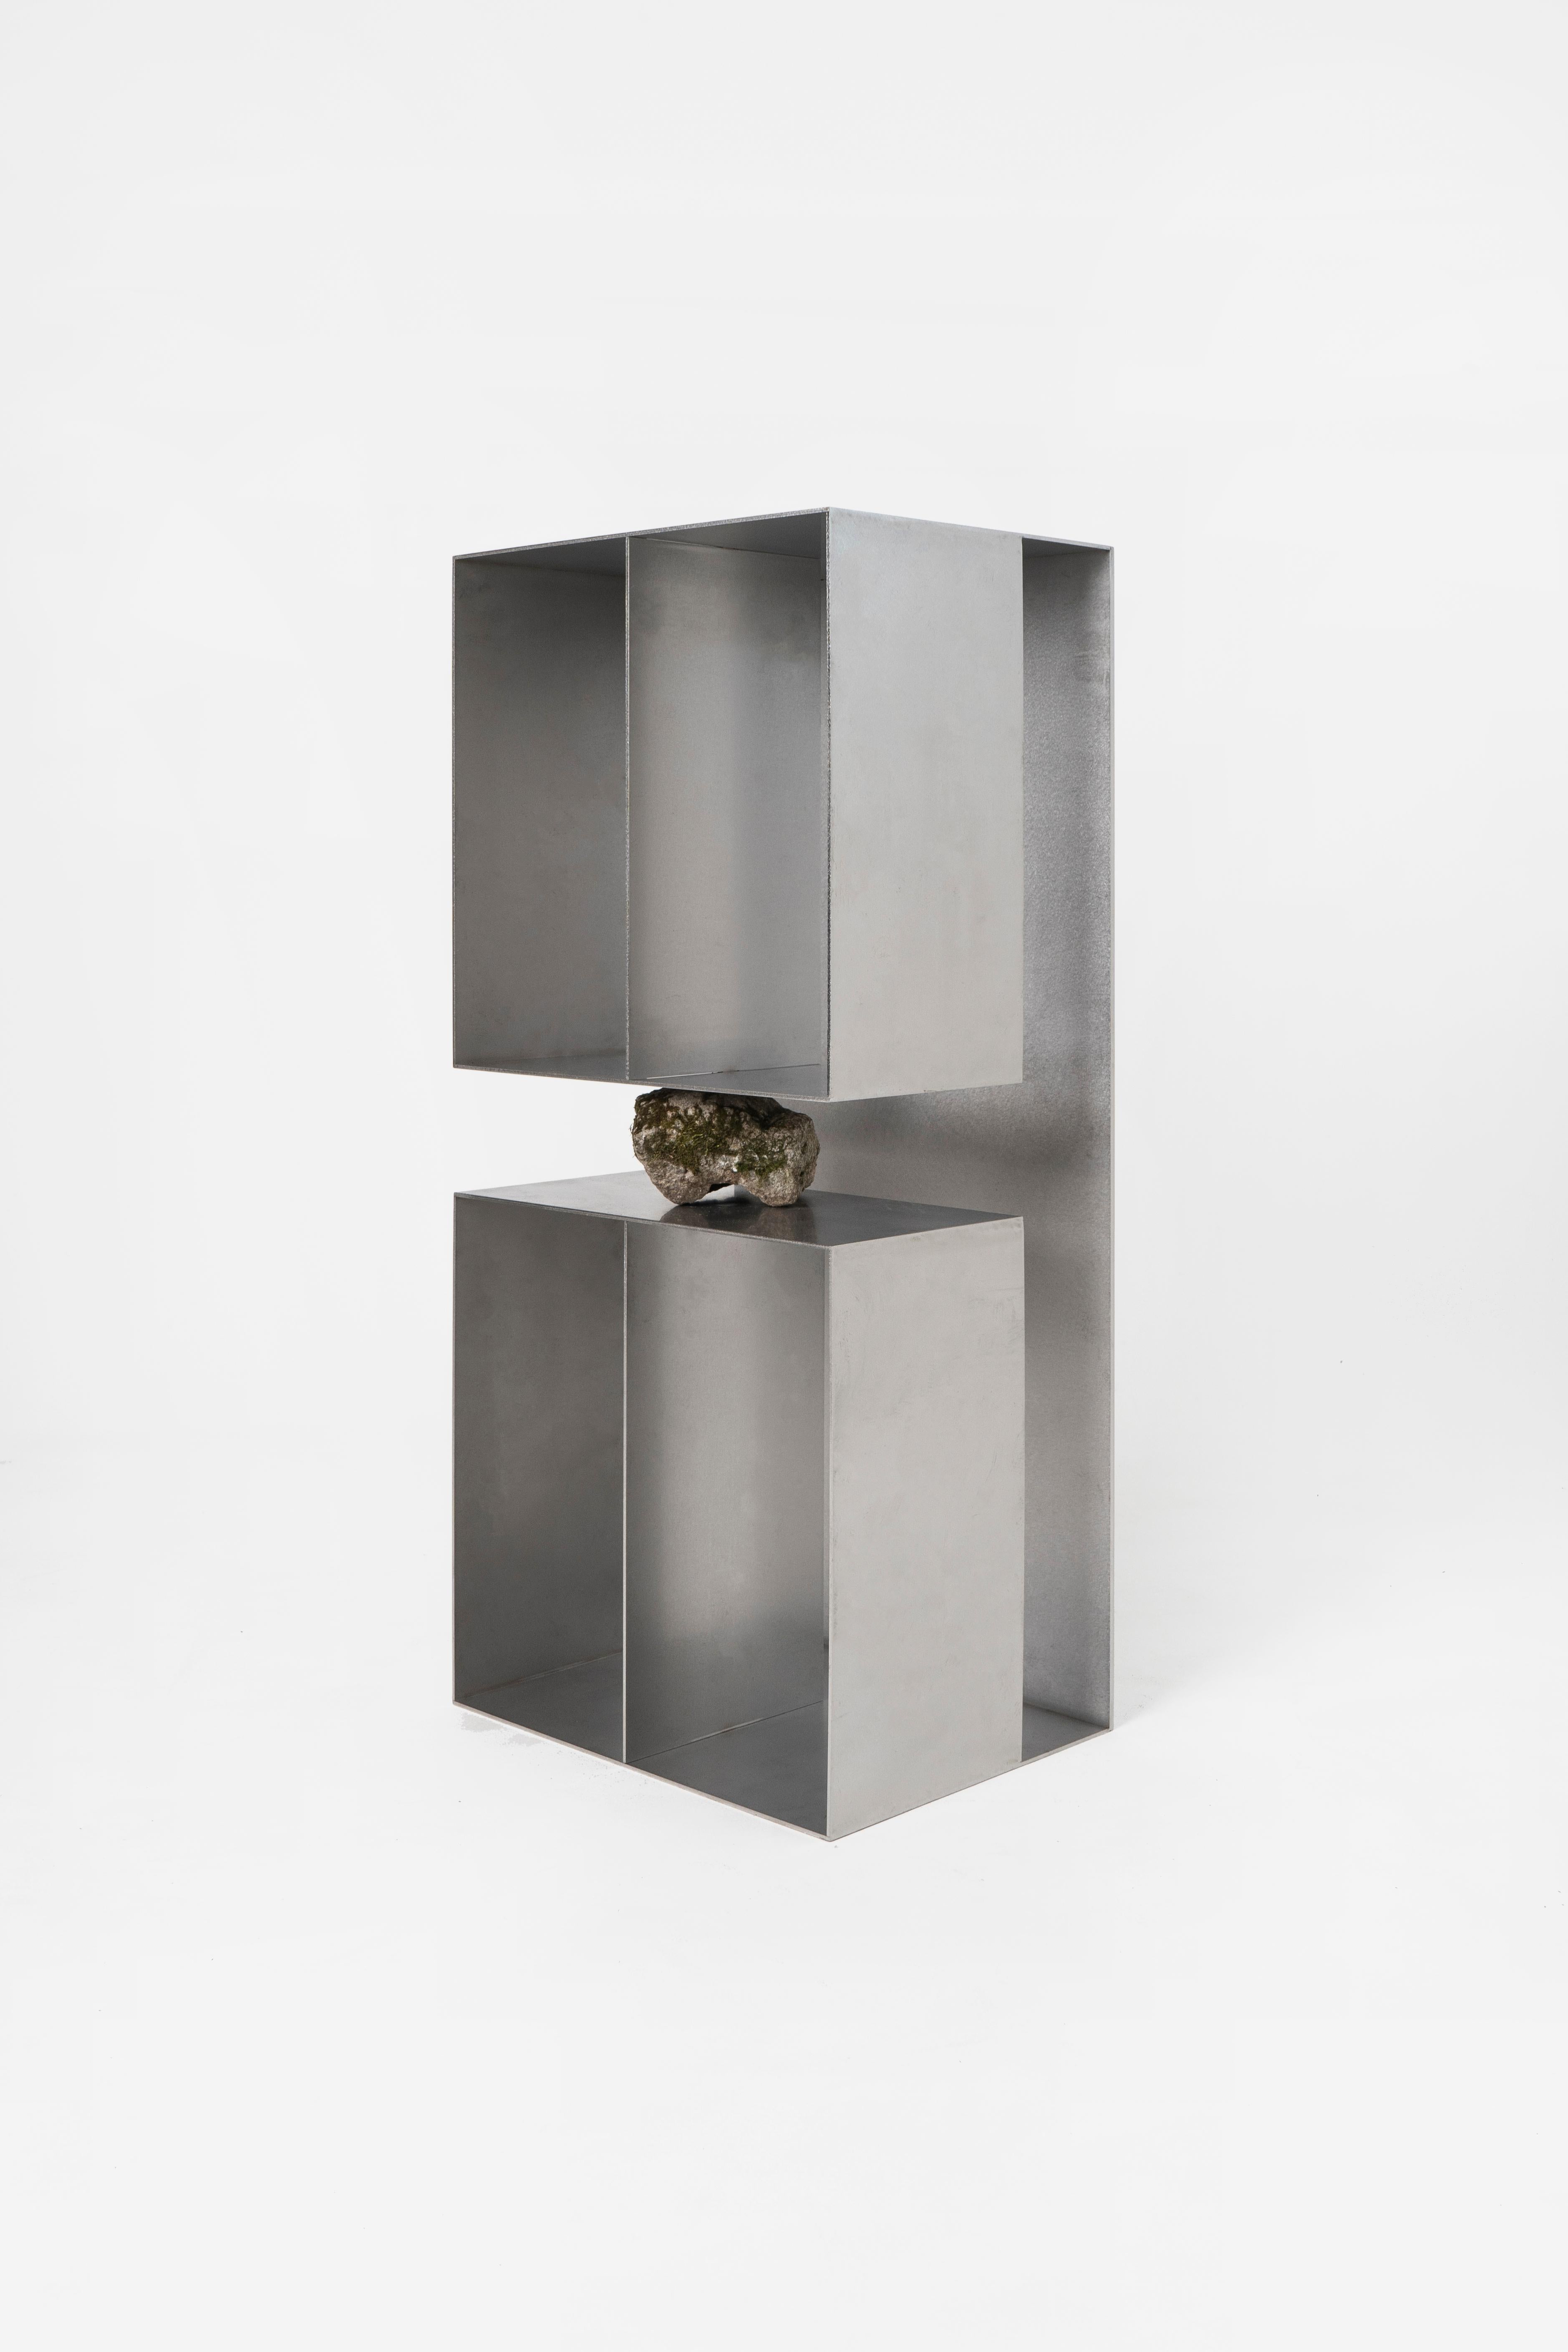 Proportions of stone shelf by Lee Sisan
2020
Dimensions: W 36 x D 28 x H 80 cm
Materials: Stainless steel, natural stone

Each piece is made to order and uses natural stones, so please expect some variability in design.

